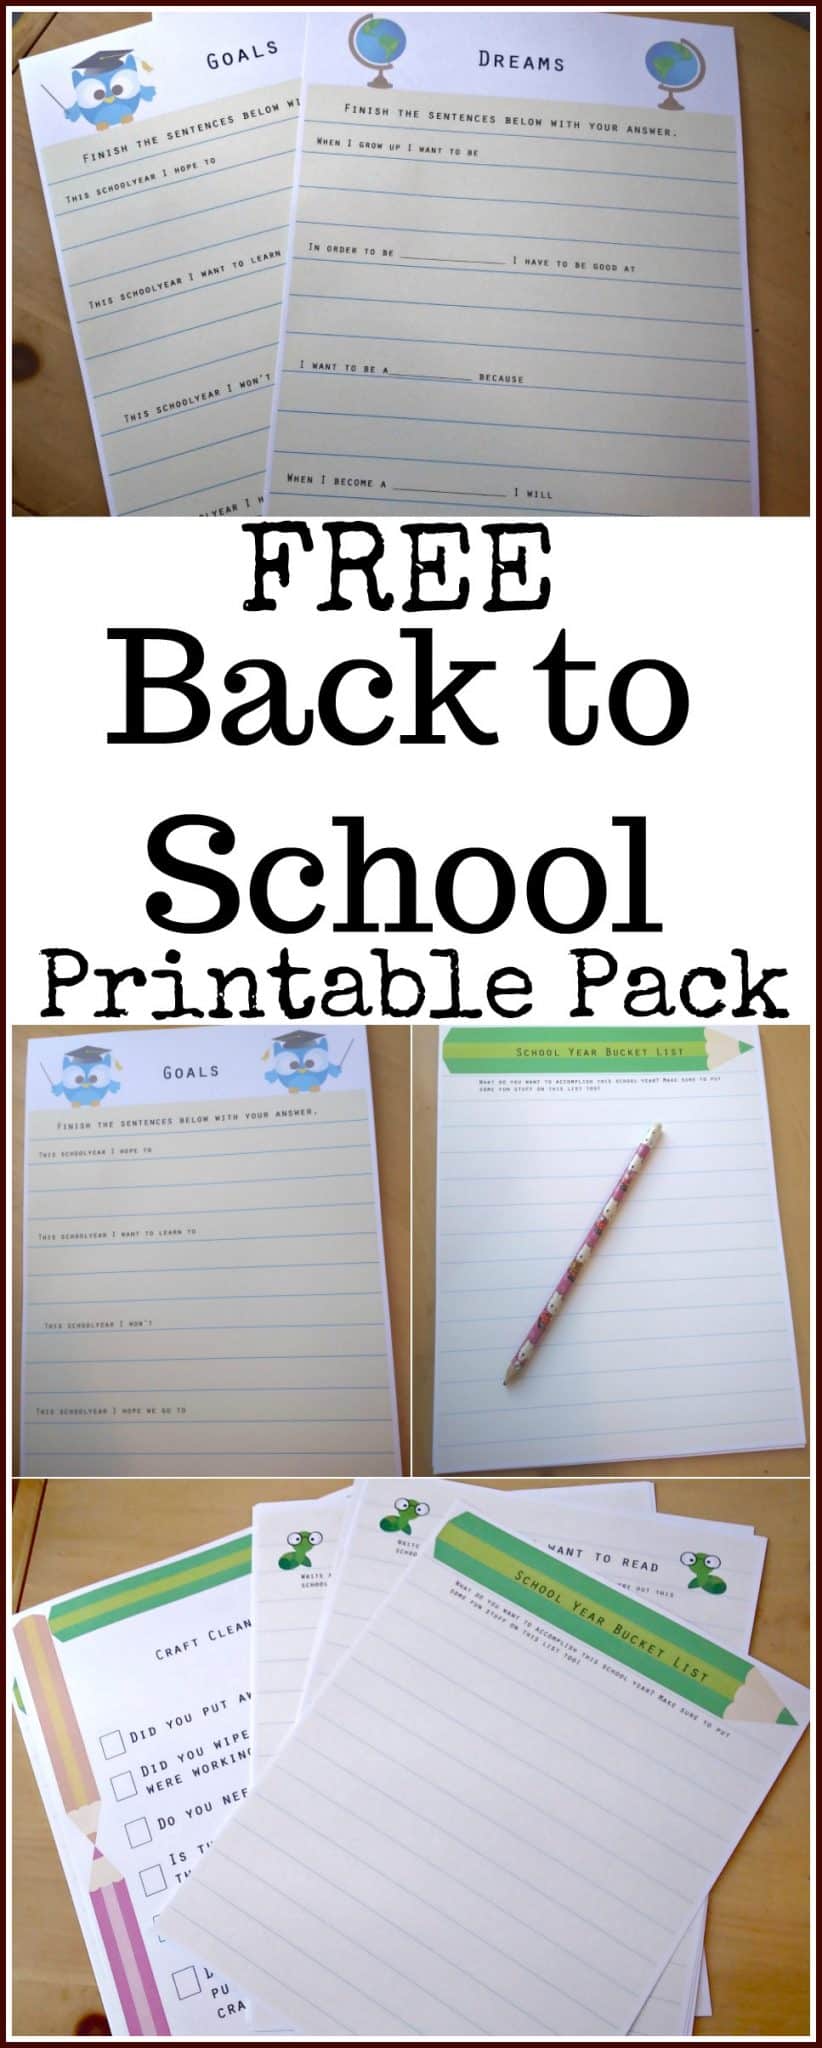 Free Back to School Printable Pack - Great for the classroom or for homeschool families!